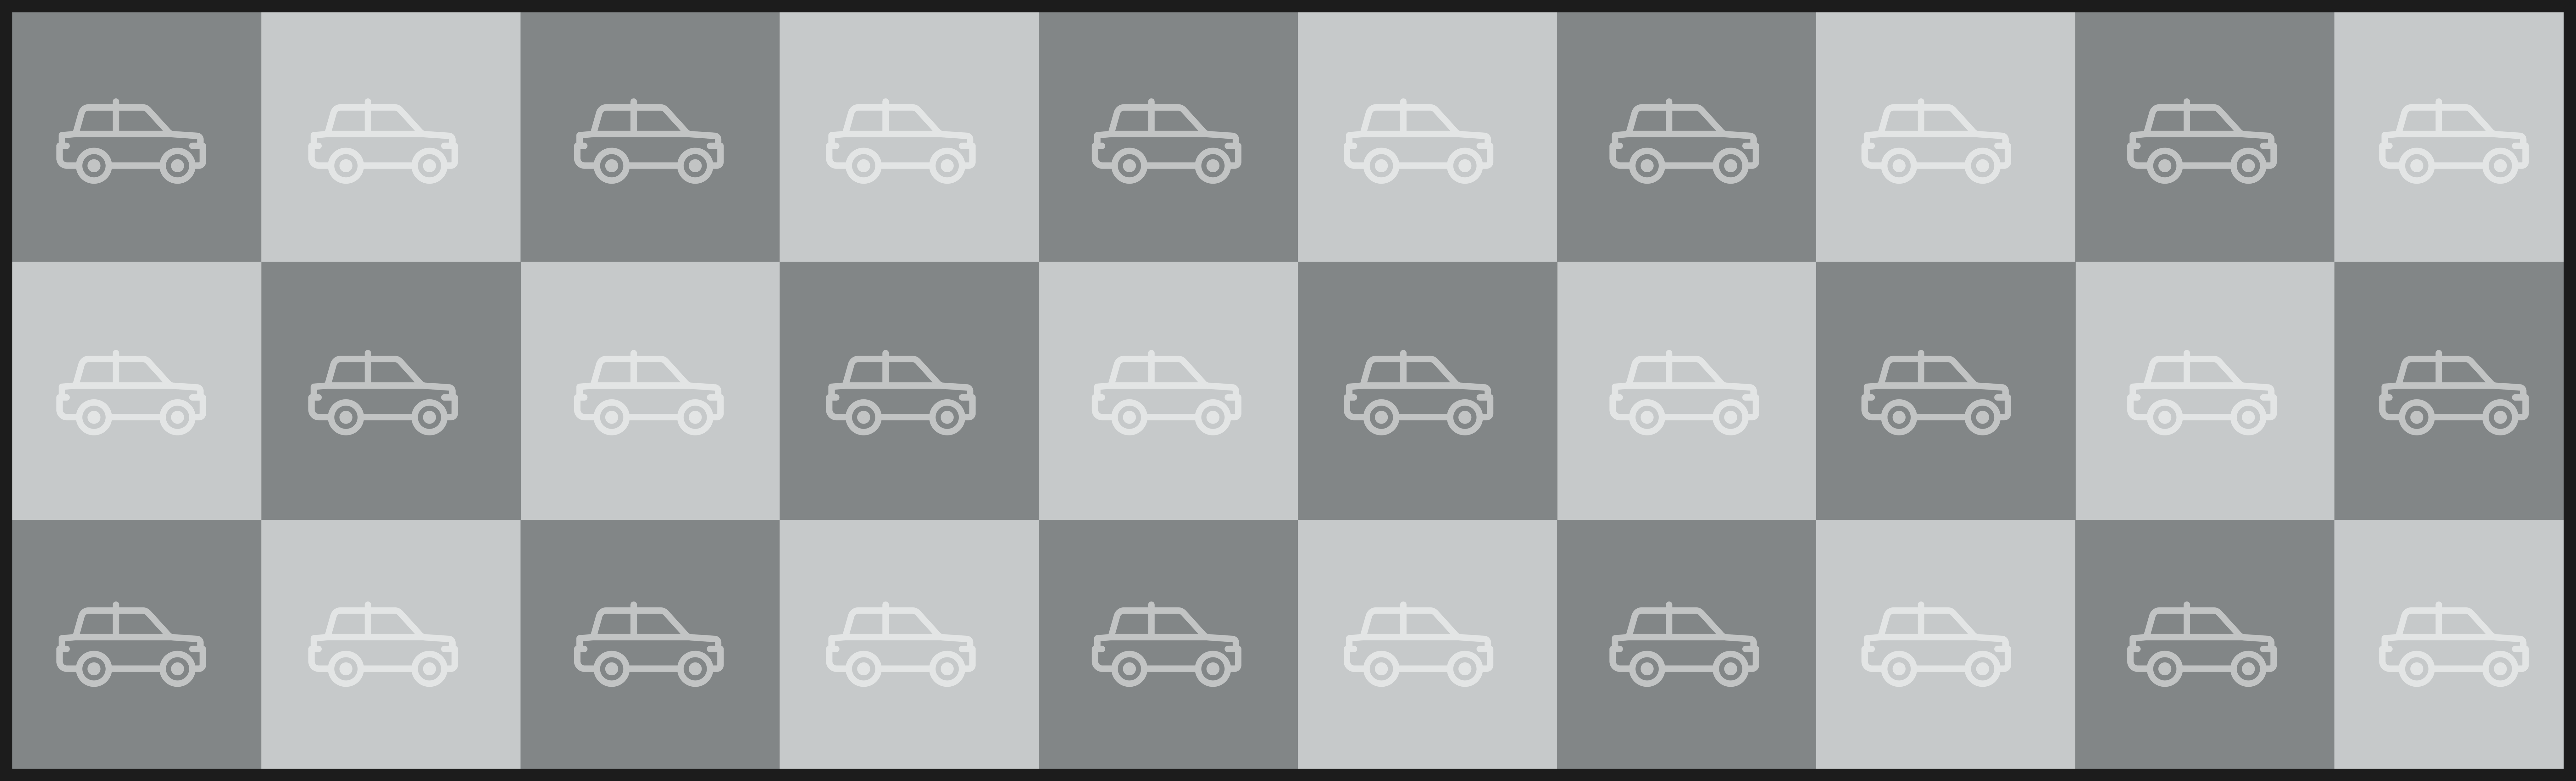 Icons related to taxis